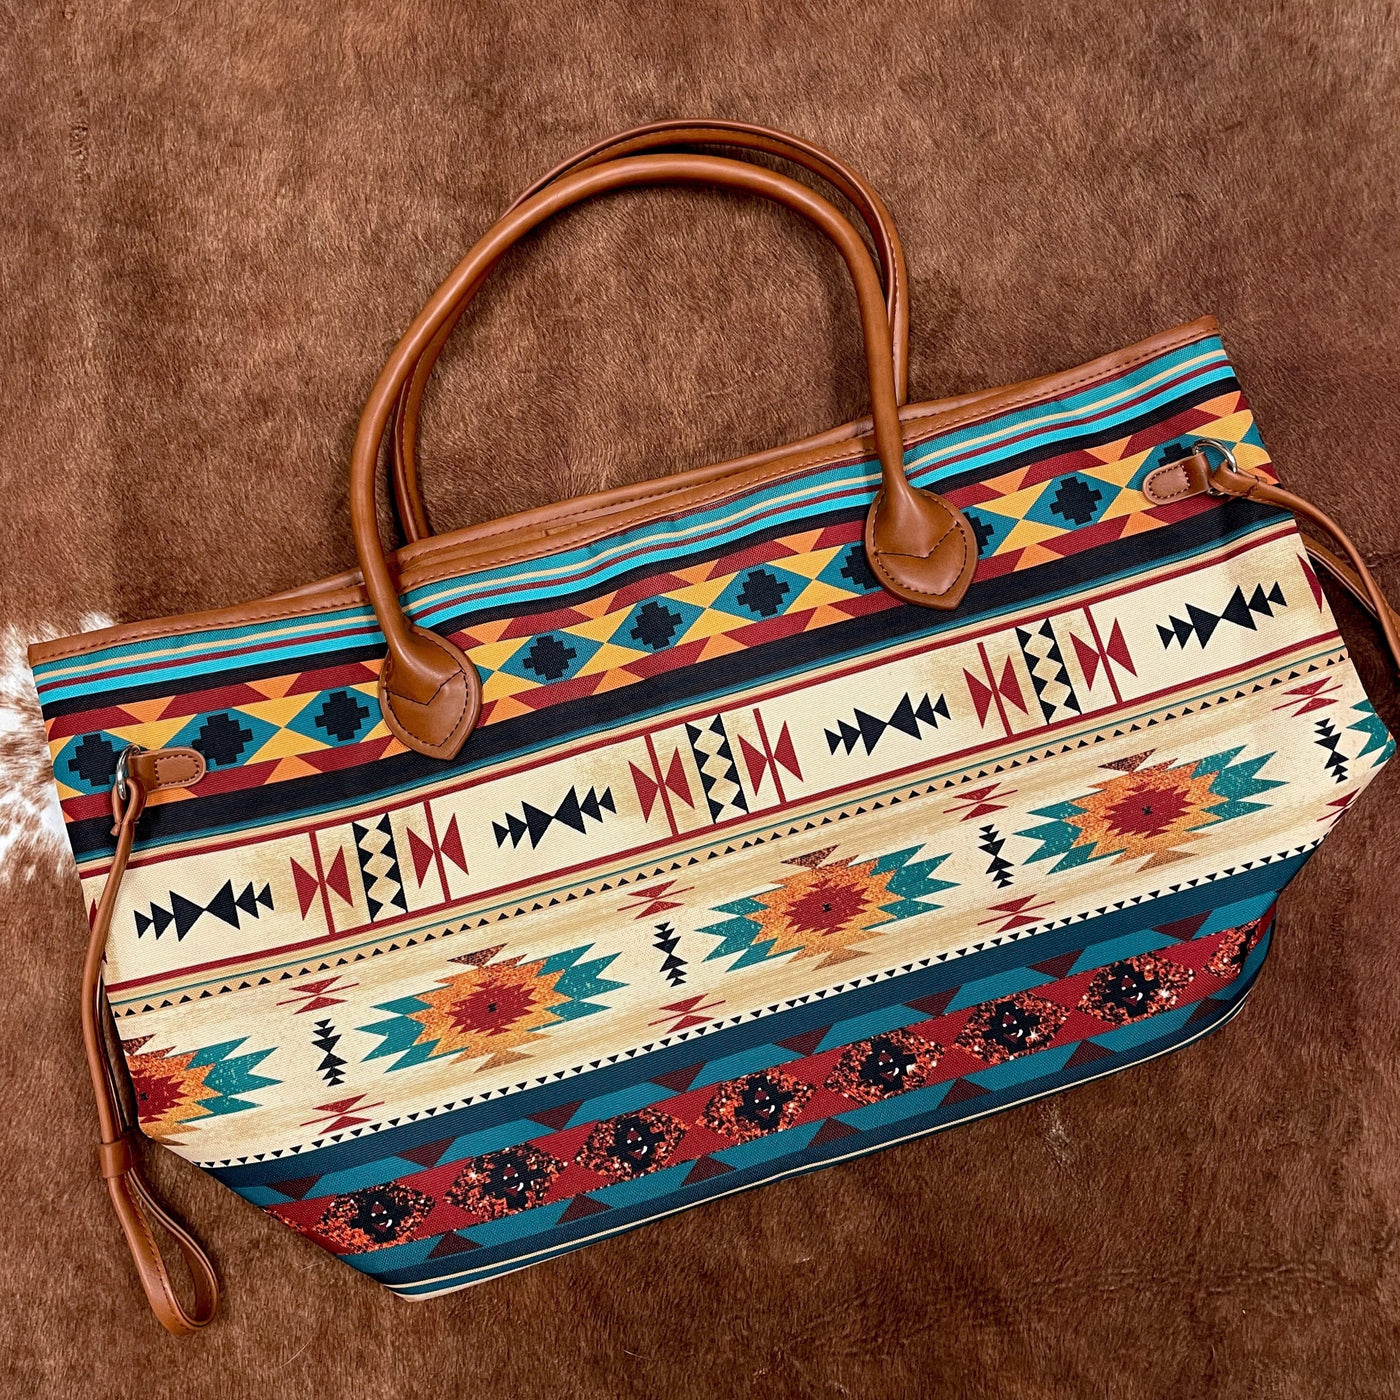 Weekender tote bag featuring a boho aztec pattern - the perfect western-inspired gift for the traveler in your life!